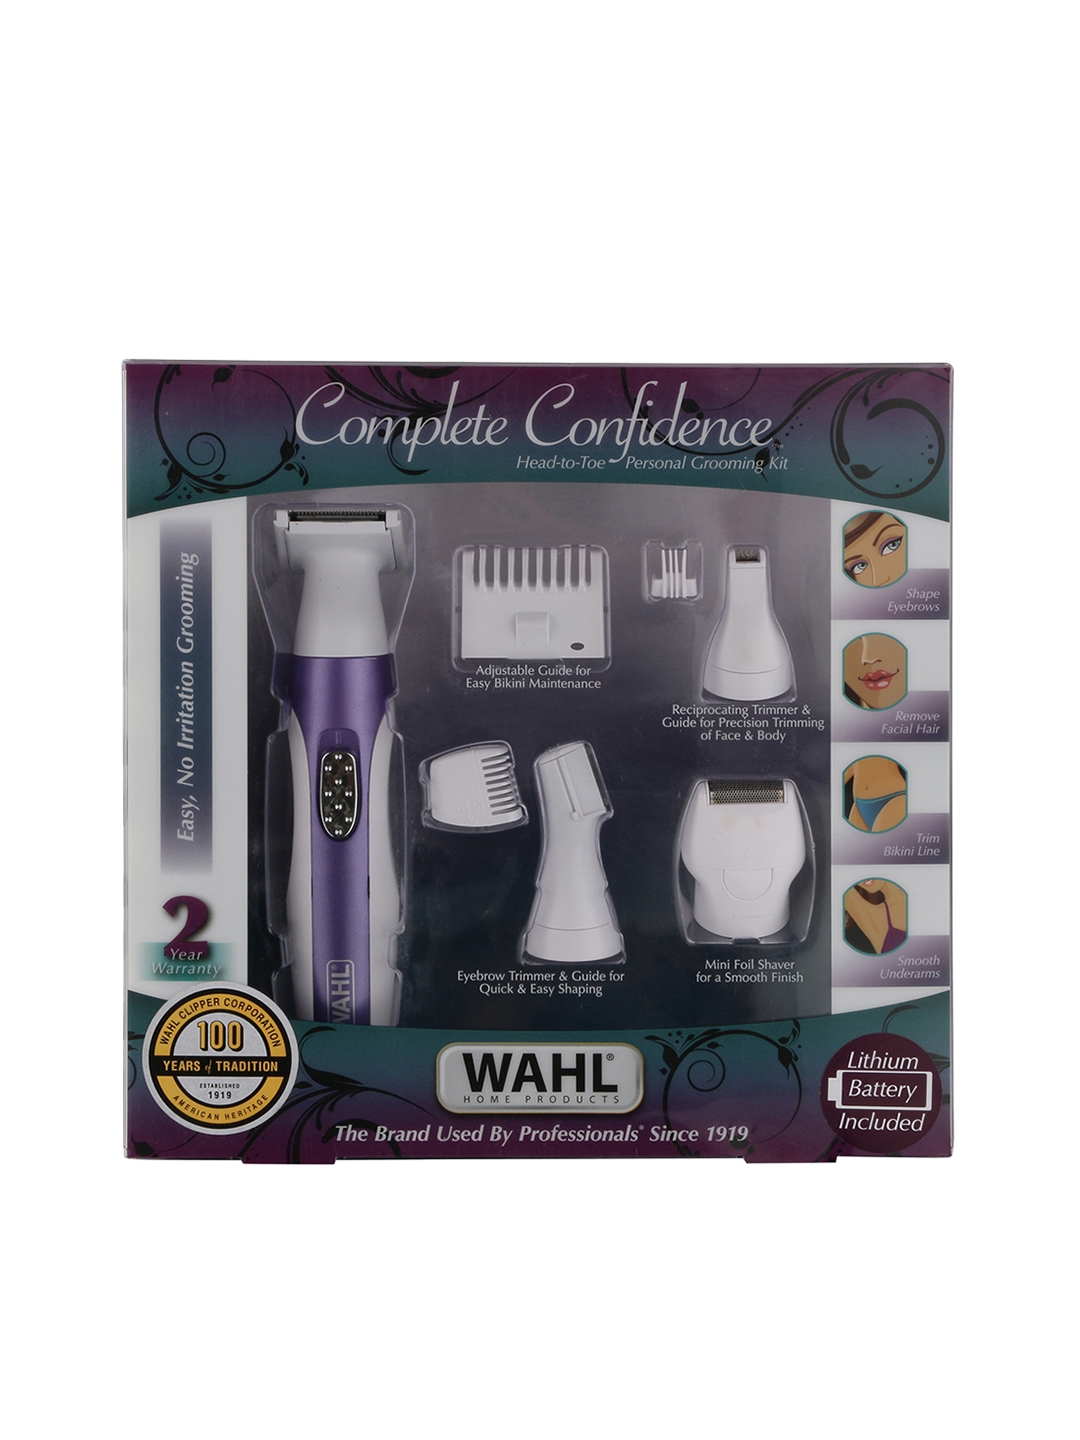 wahl women's personal trimmer